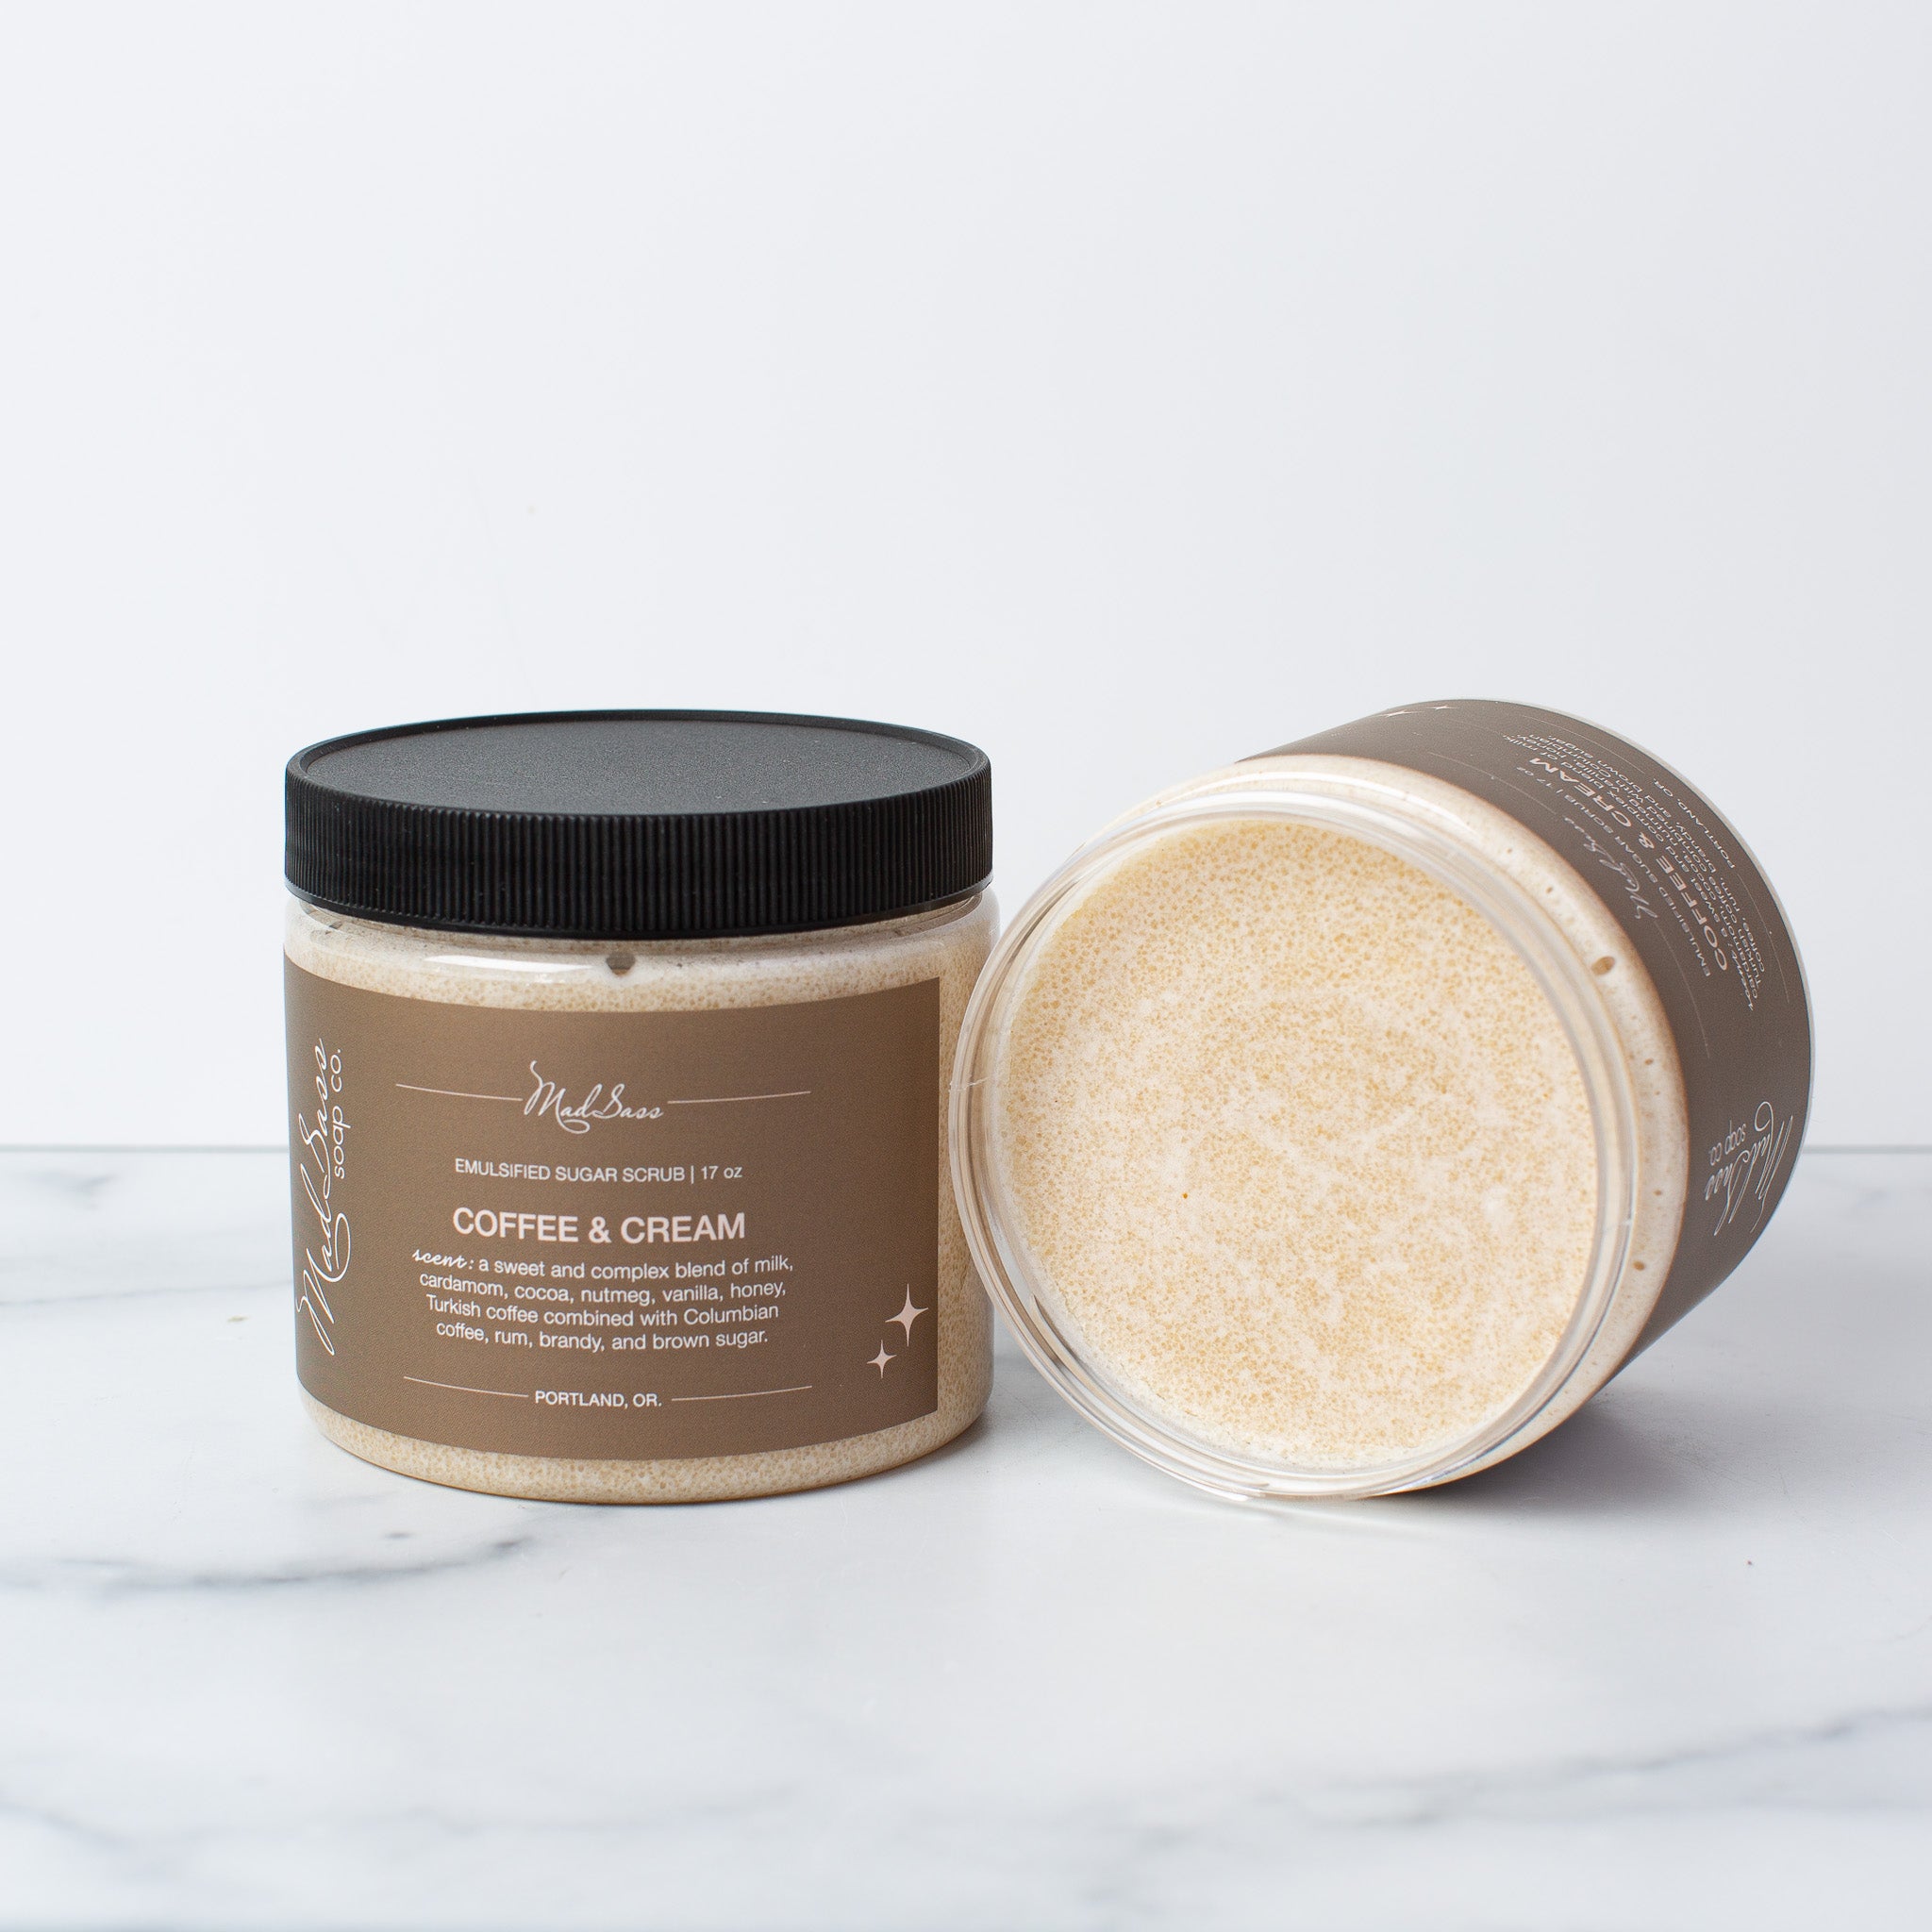 Two Coffee & Cream Emulsified Sugar Scrubs, with one on its side, on a white background.